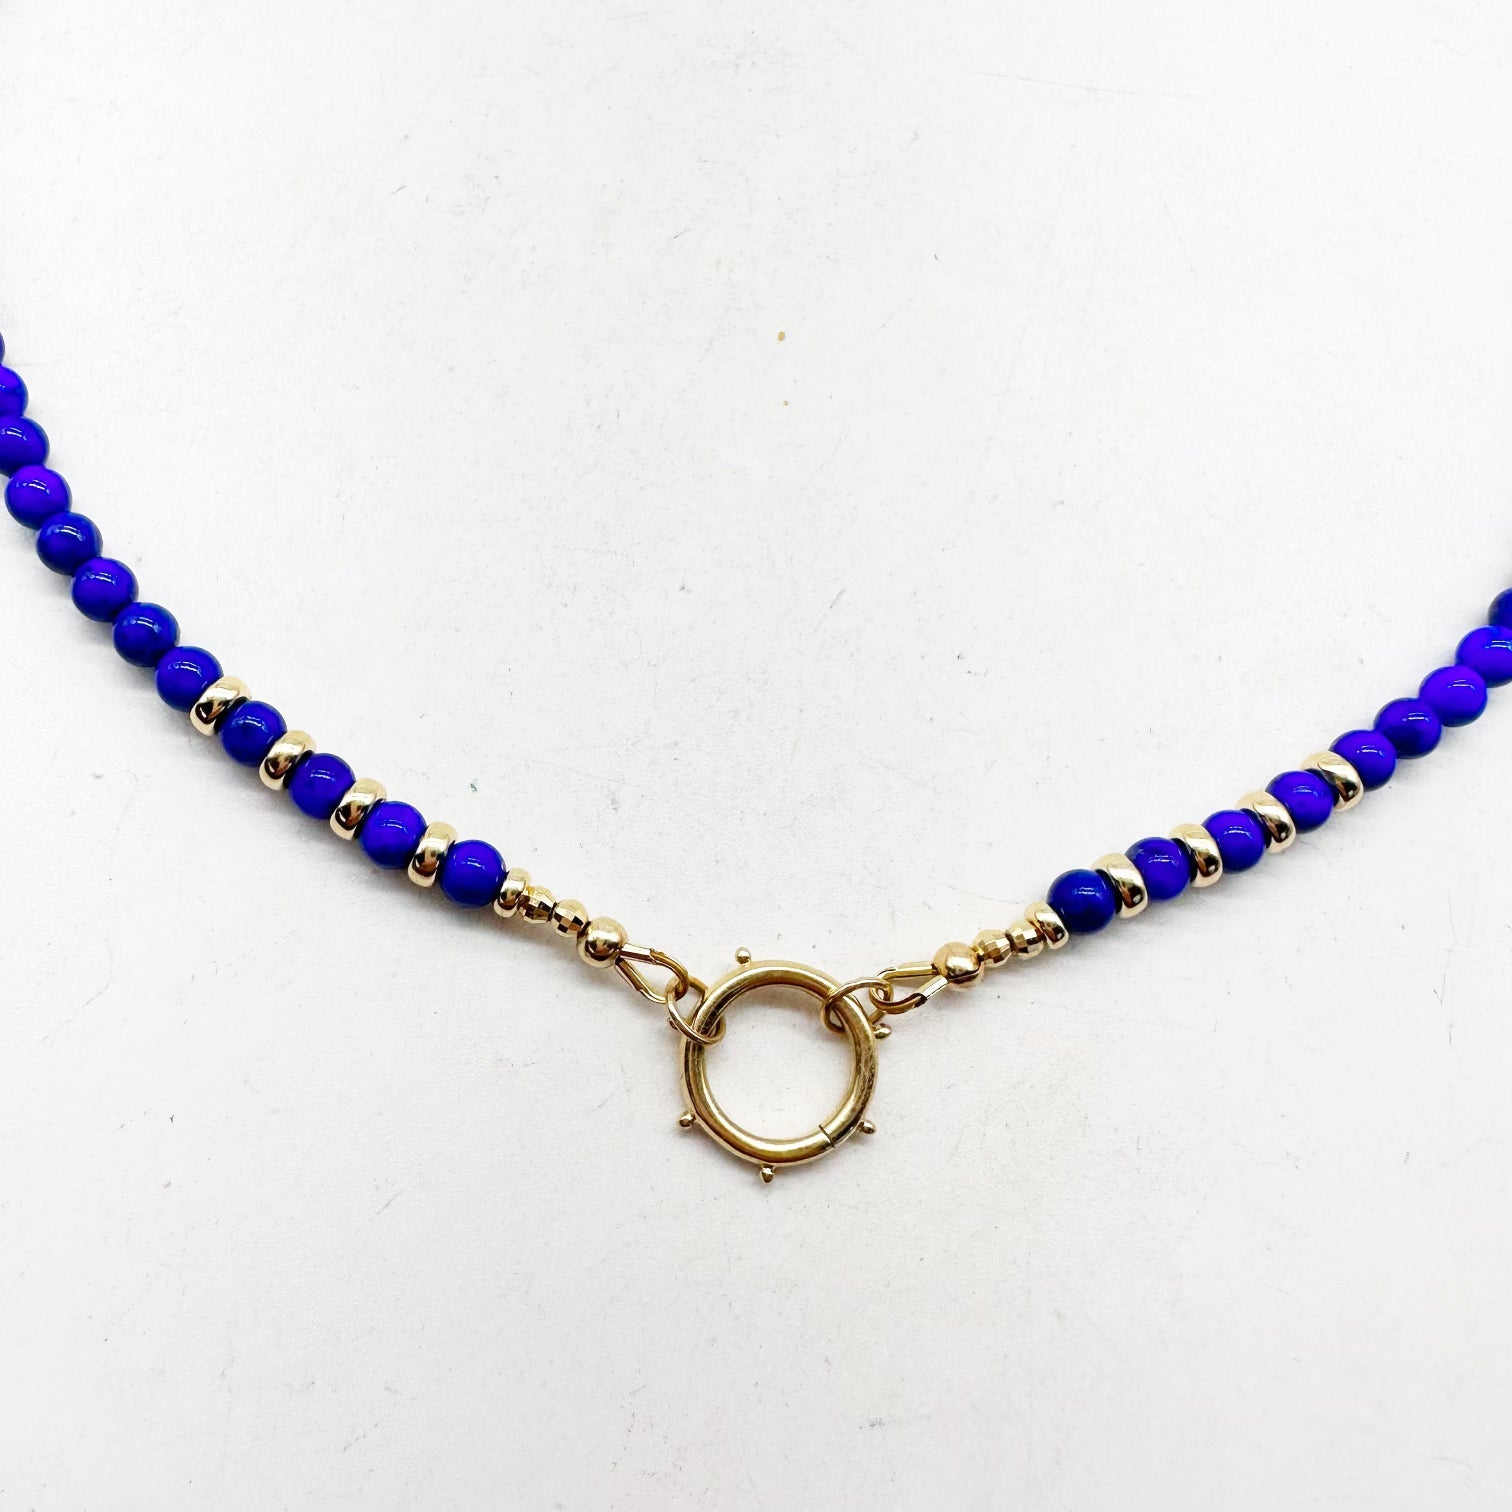 LAPIS NECKLACE WITH CHARM HOLDER CLASP